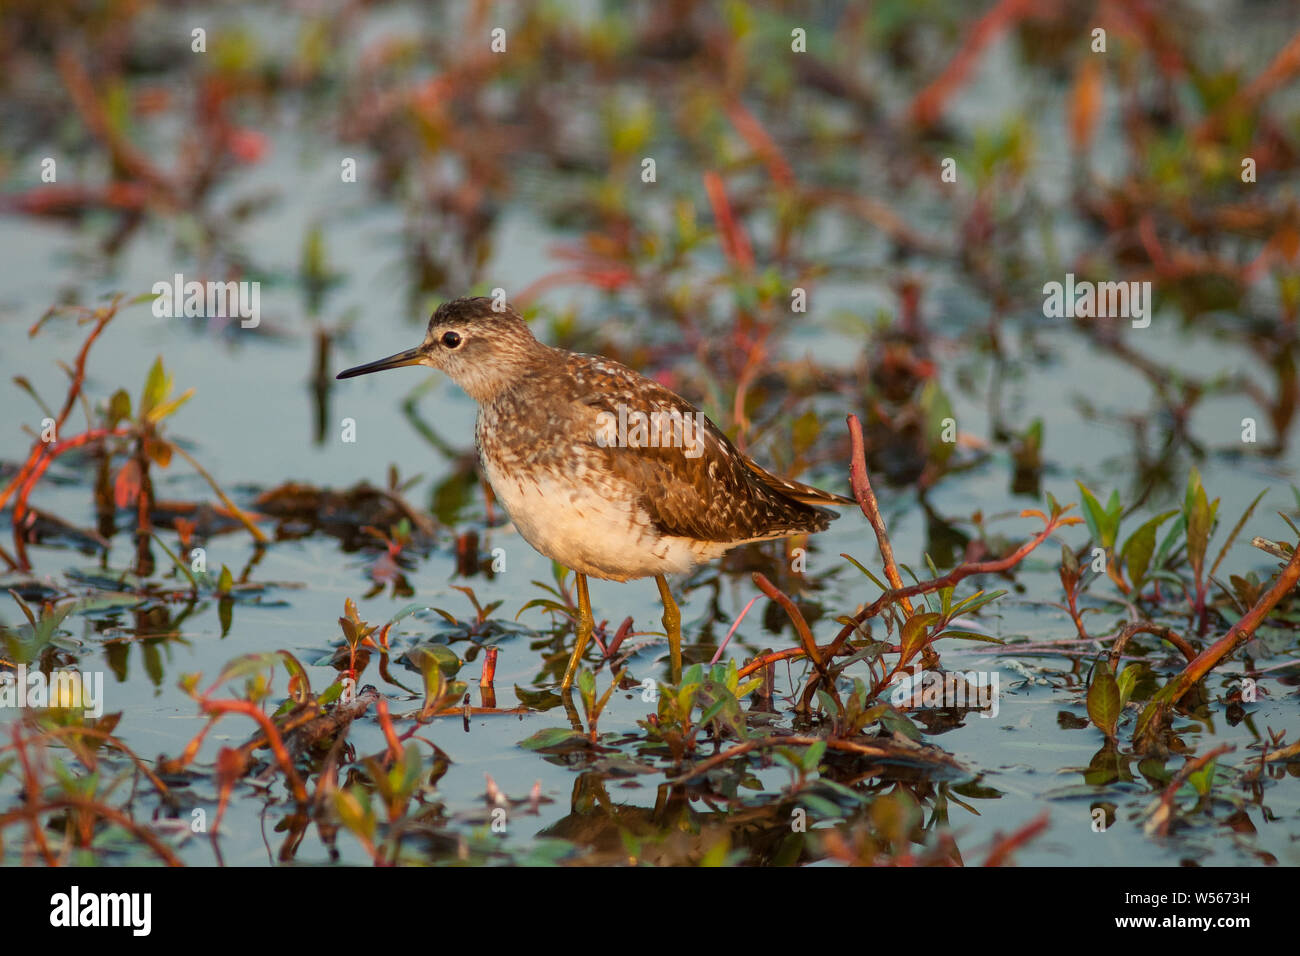 Wood Sandpiper Tringa glareola. Photographed on southward migration  foraging for small insects in shallow water on the Nile outside Khartoum, Sudan. Stock Photo